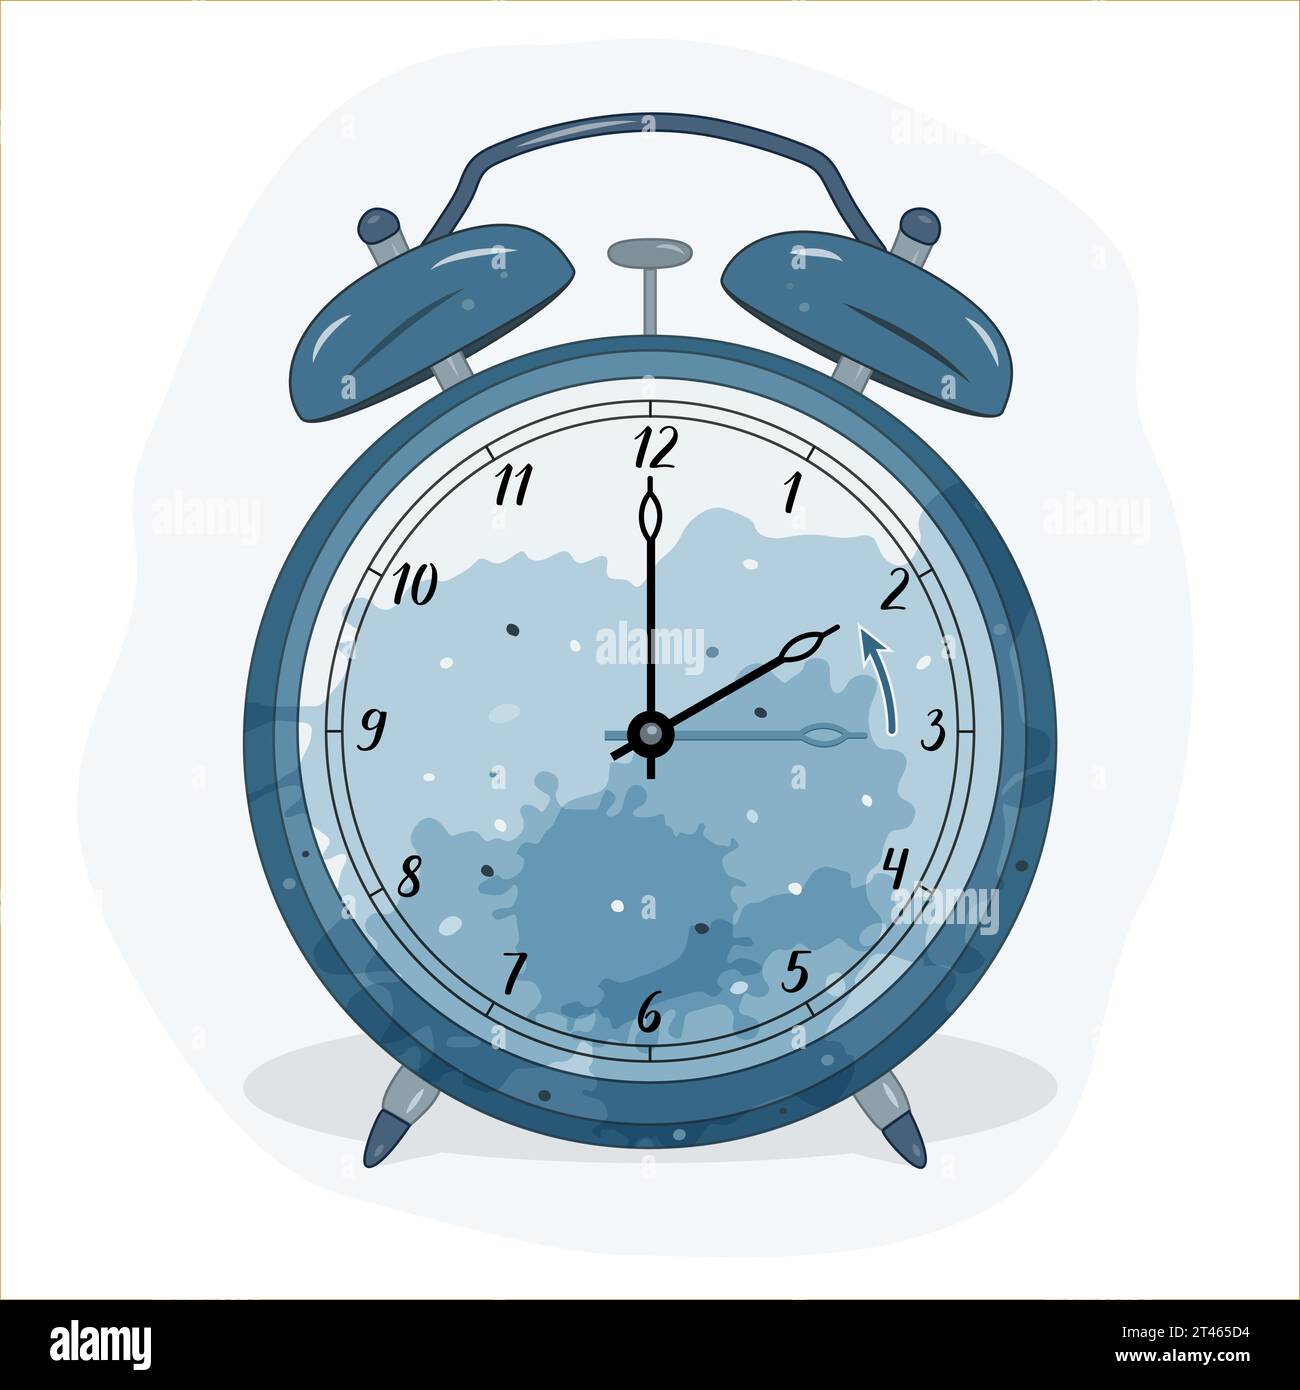 Illustration of an alarm clock. The blue one symbolizes the winter time. Time adjustment symbol. Moving the hands backward from 3:00 to 2:00. Stock Vector